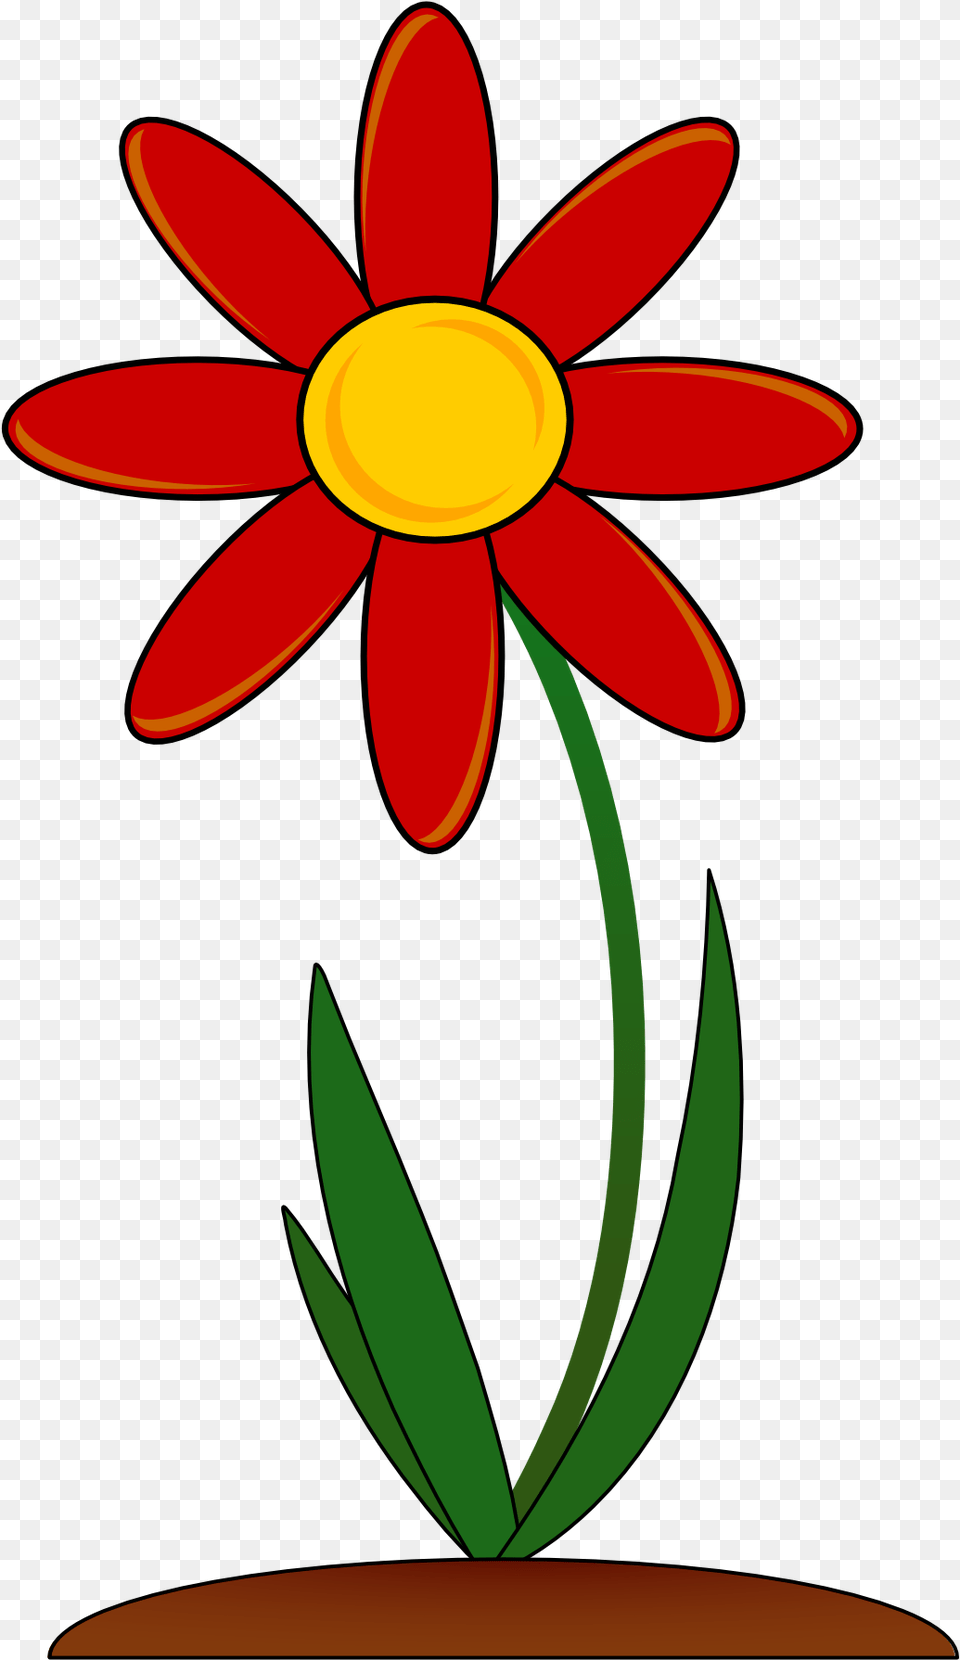 Cool Flower Cliparts For Animated Picture Of Flower, Daisy, Plant, Petal, Cross Png Image